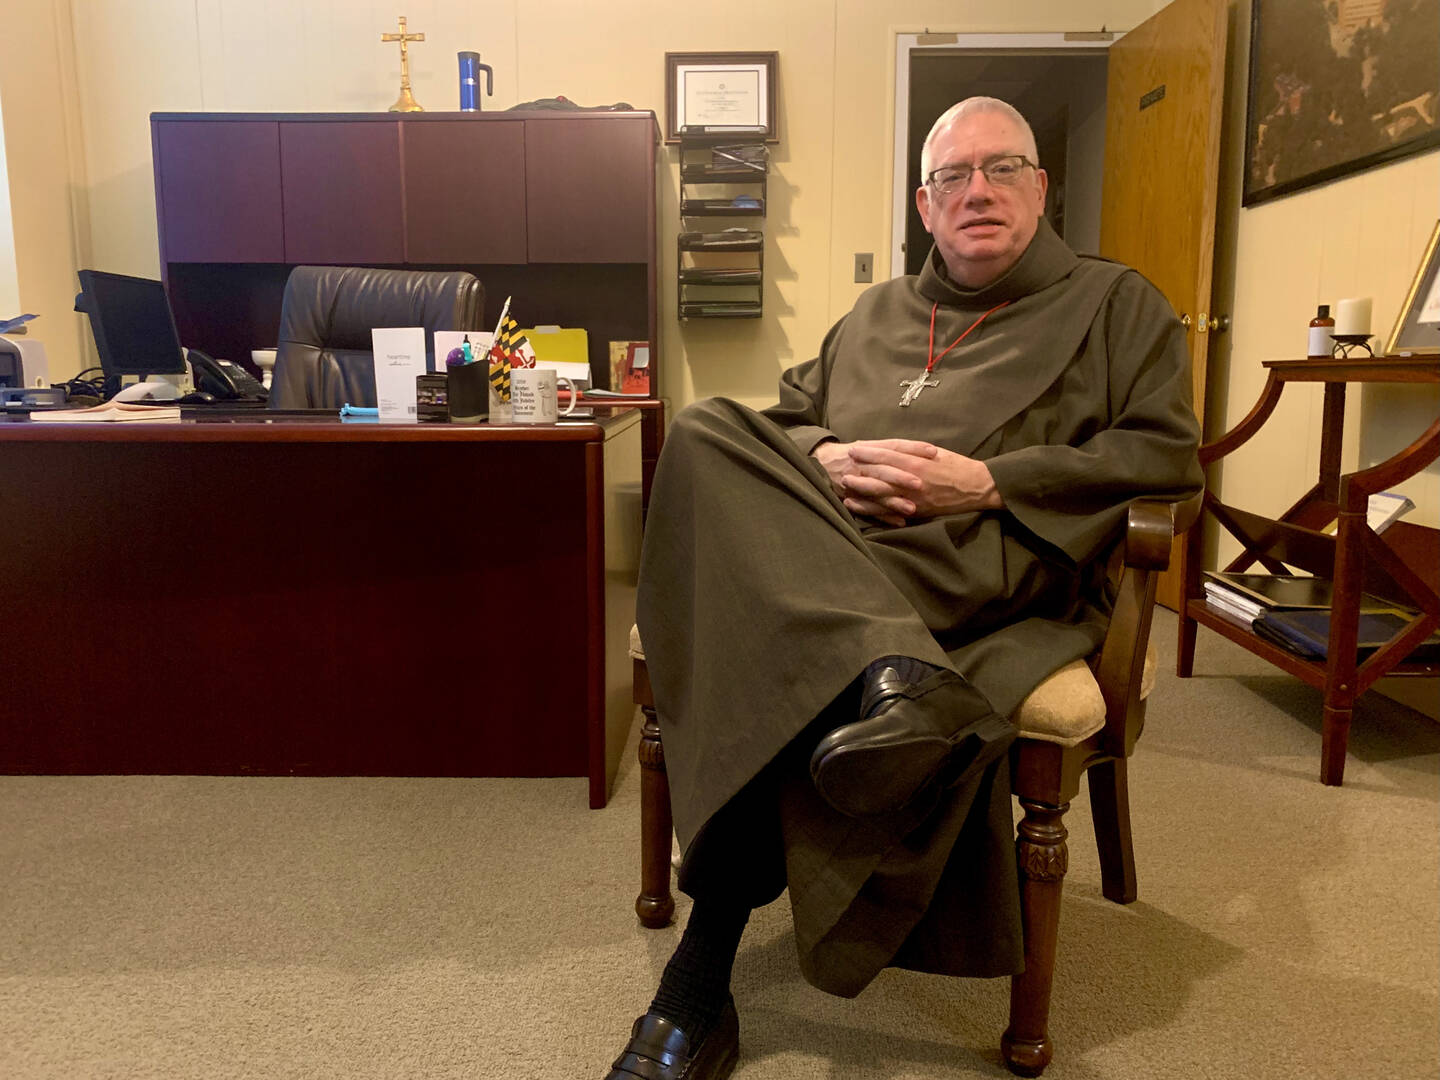 Father Loughran in his habit sitting cross-legged in a chair.